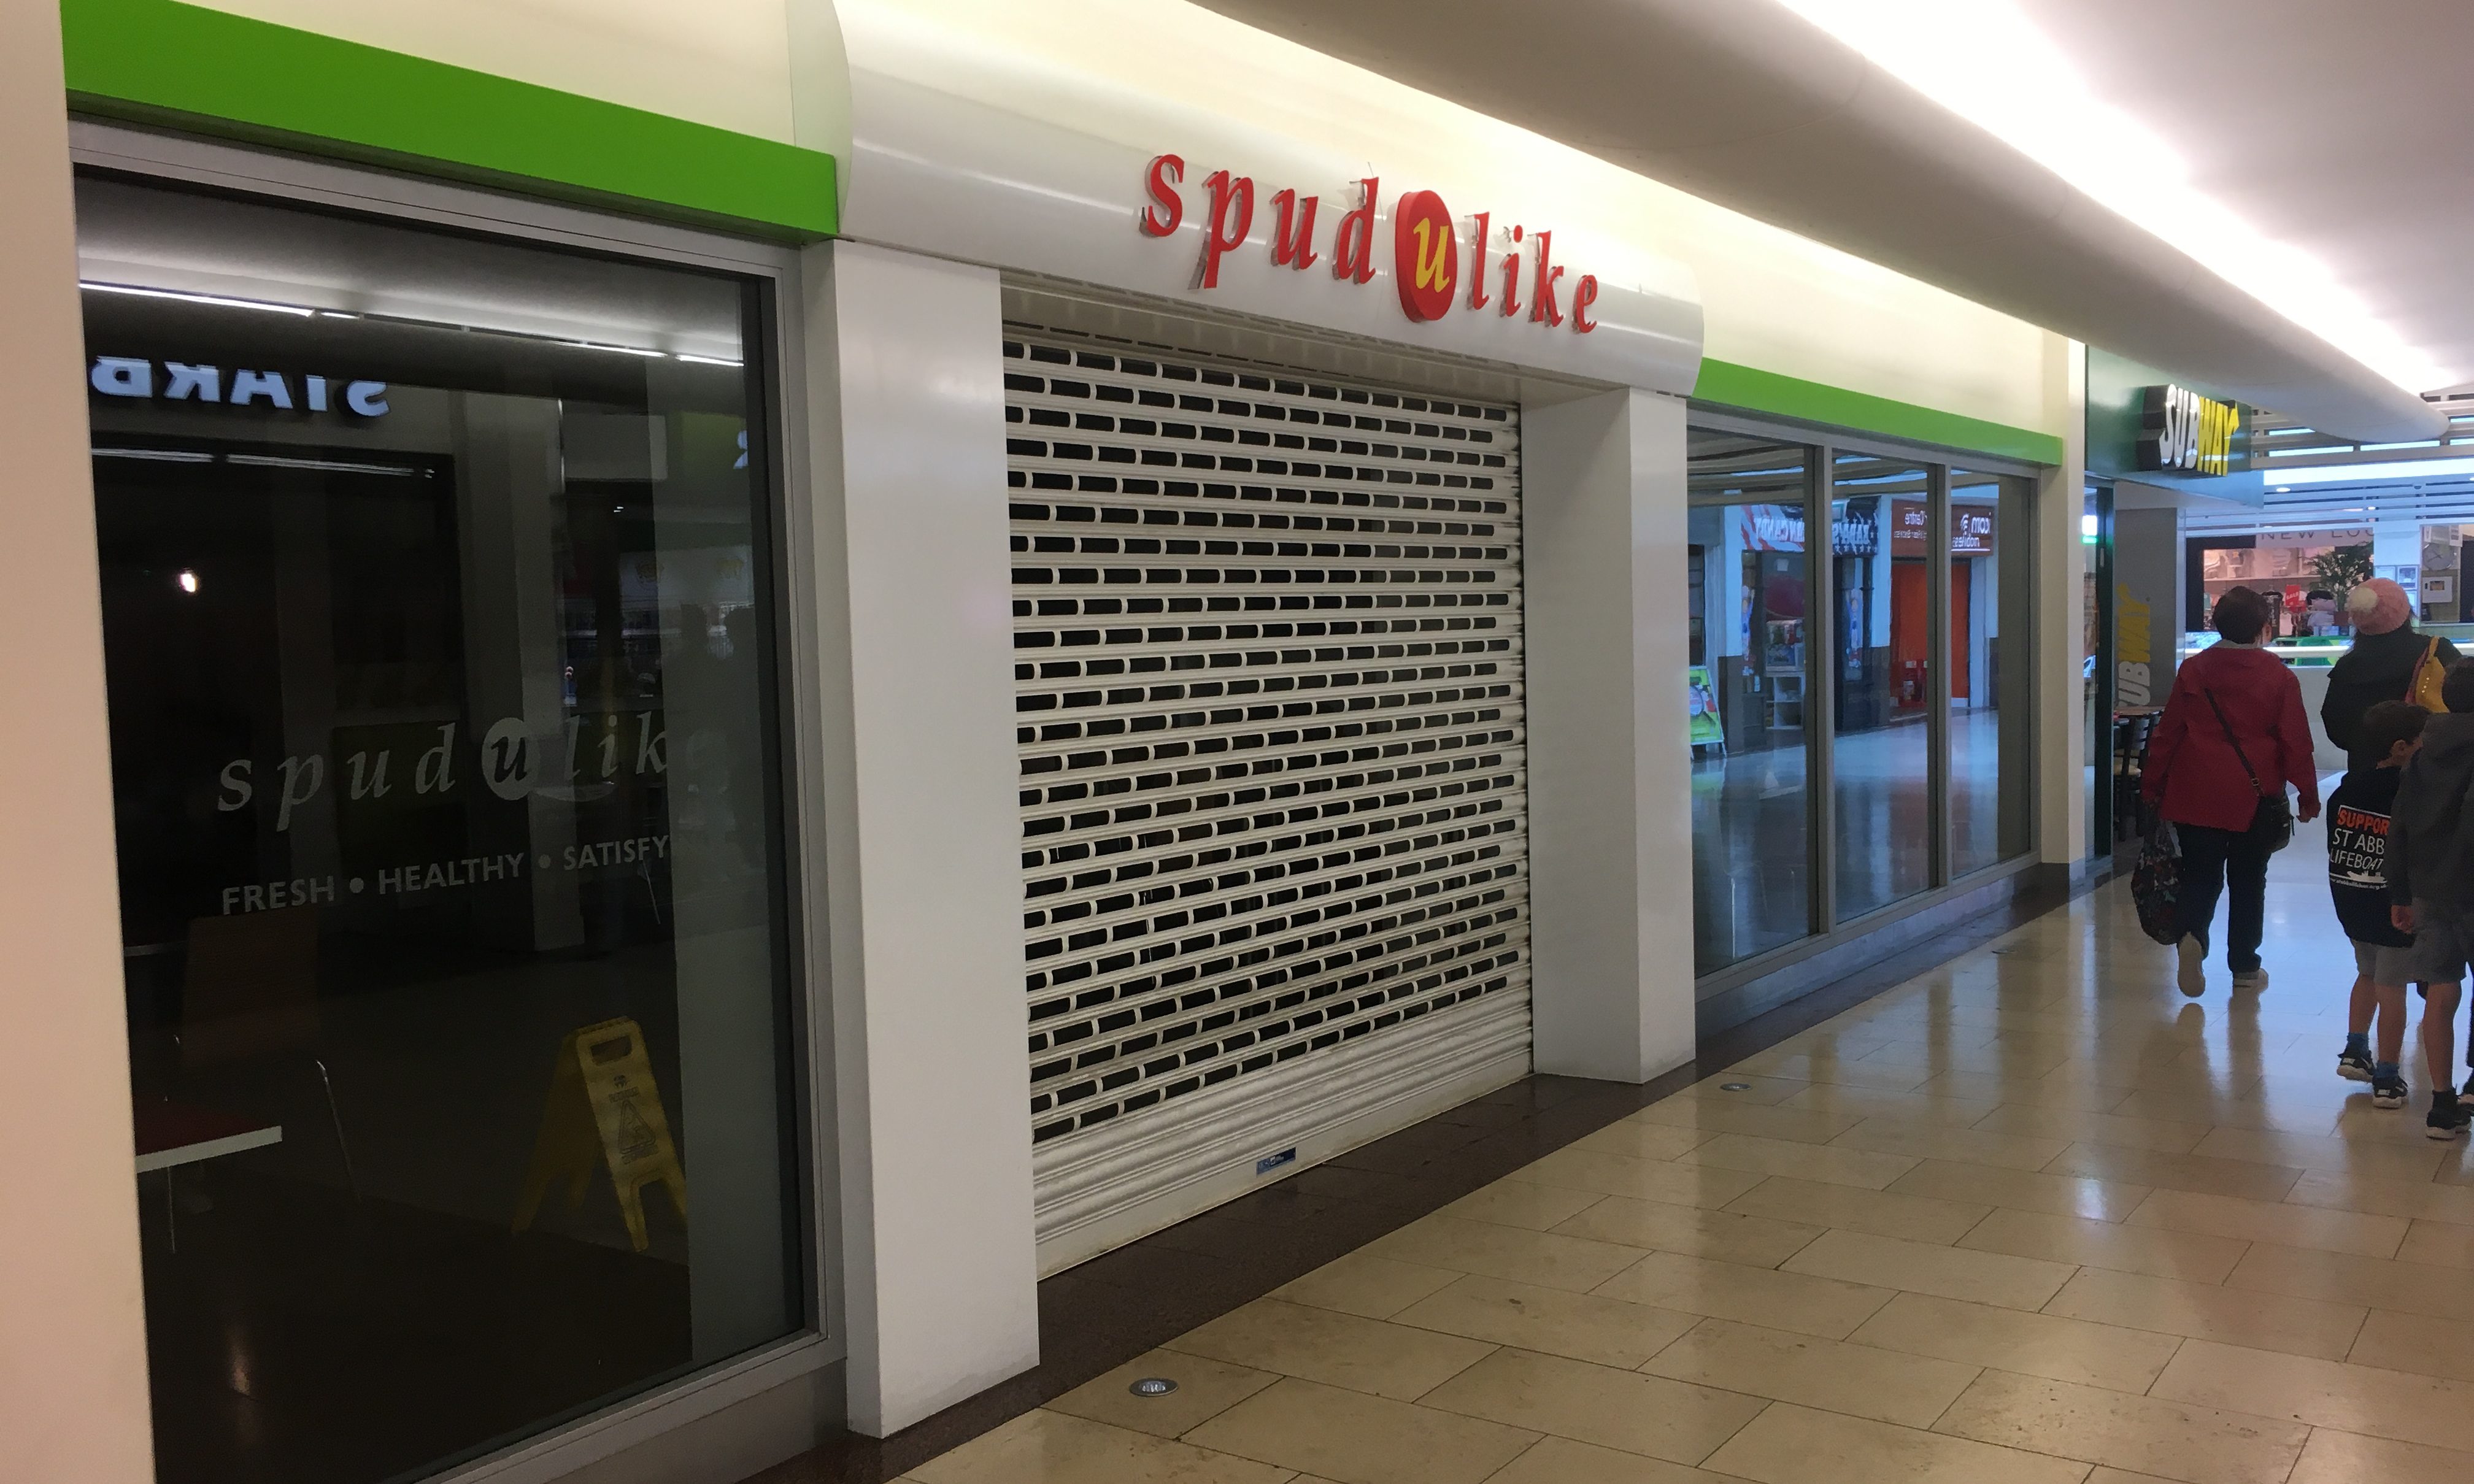 Spudulike at the Overgate Shopping Centre in Dundee.